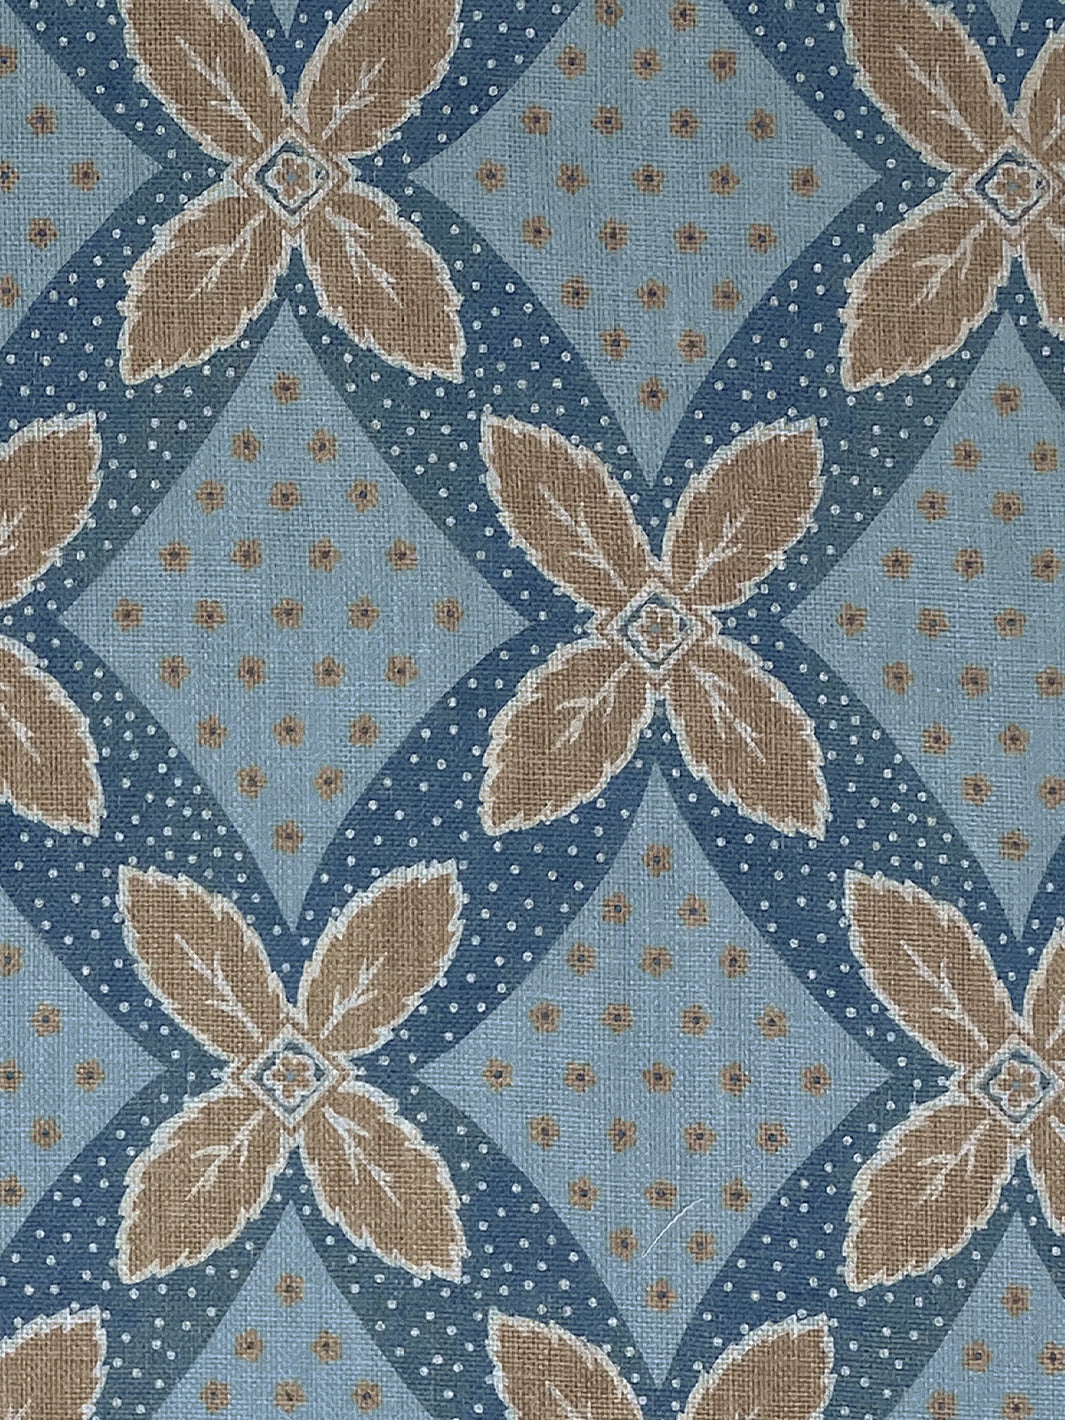 'Arthur' Linen Fabric by Nathan Turner - Taupe on Blue